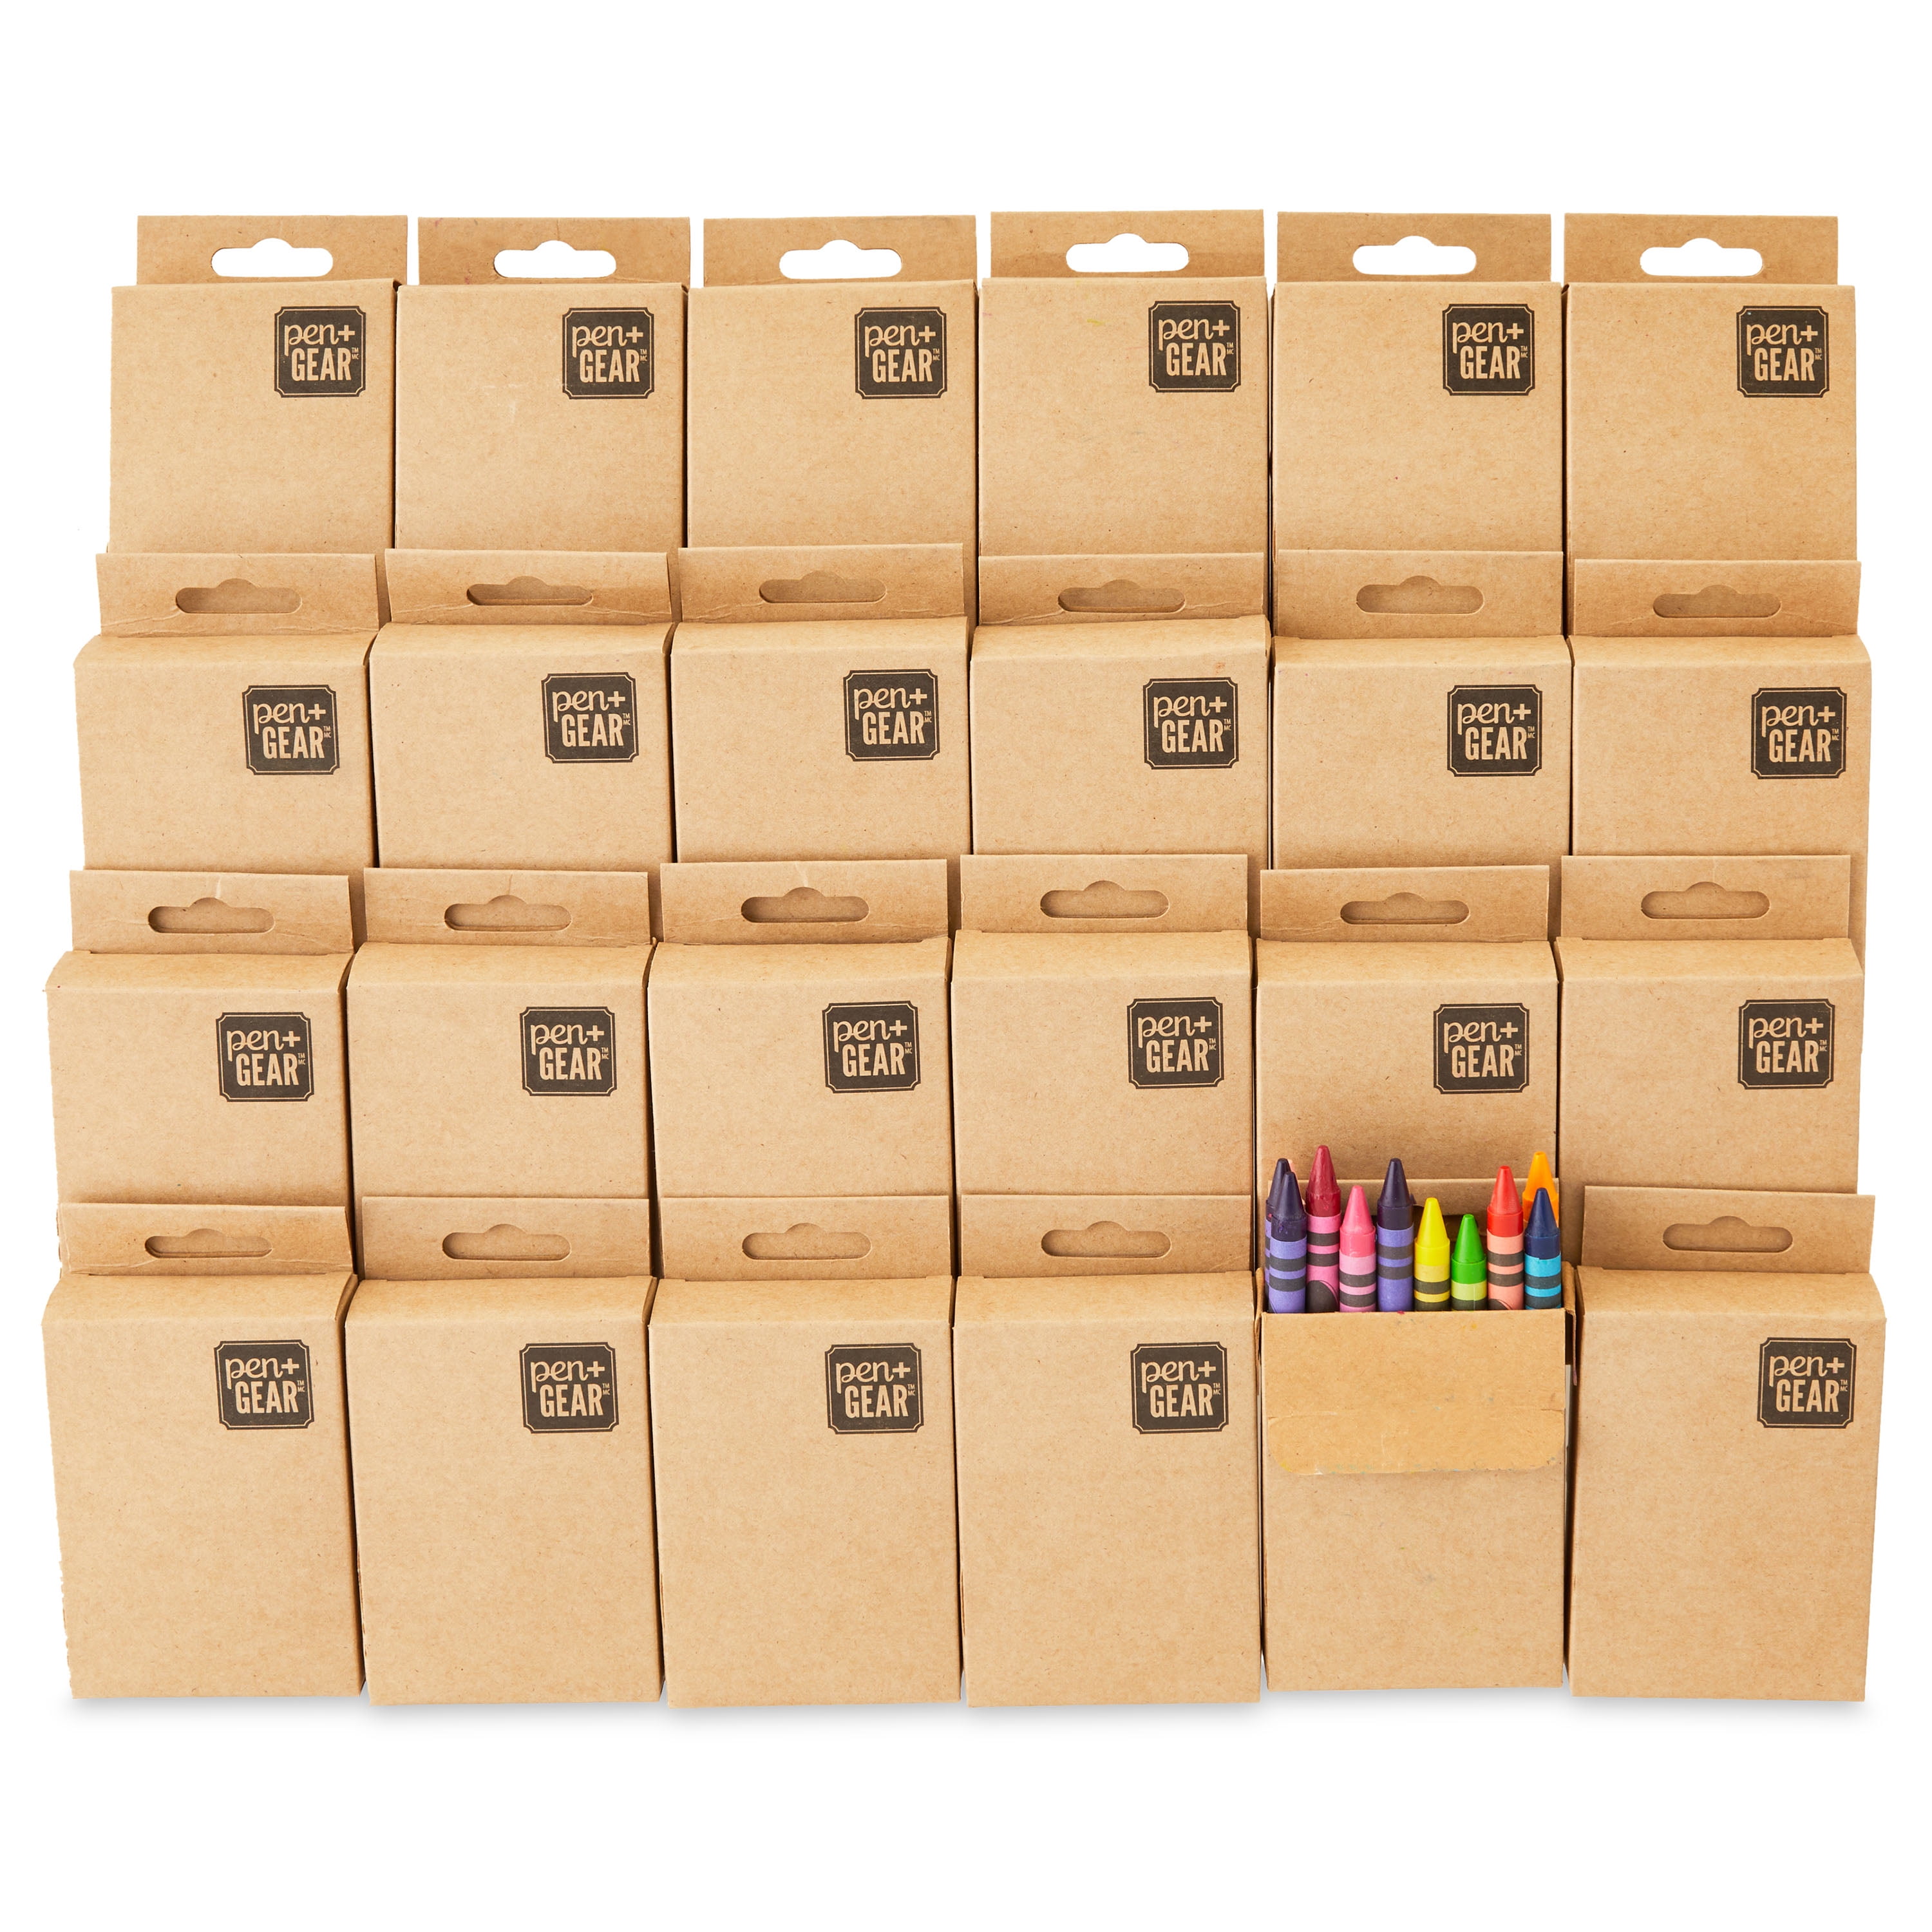 Pen+Gear Pen + Gear Classic Crayons in Bulk, Classroom Supplies for Teachers, 24 Crayon Packs with 24 Assorted Colors